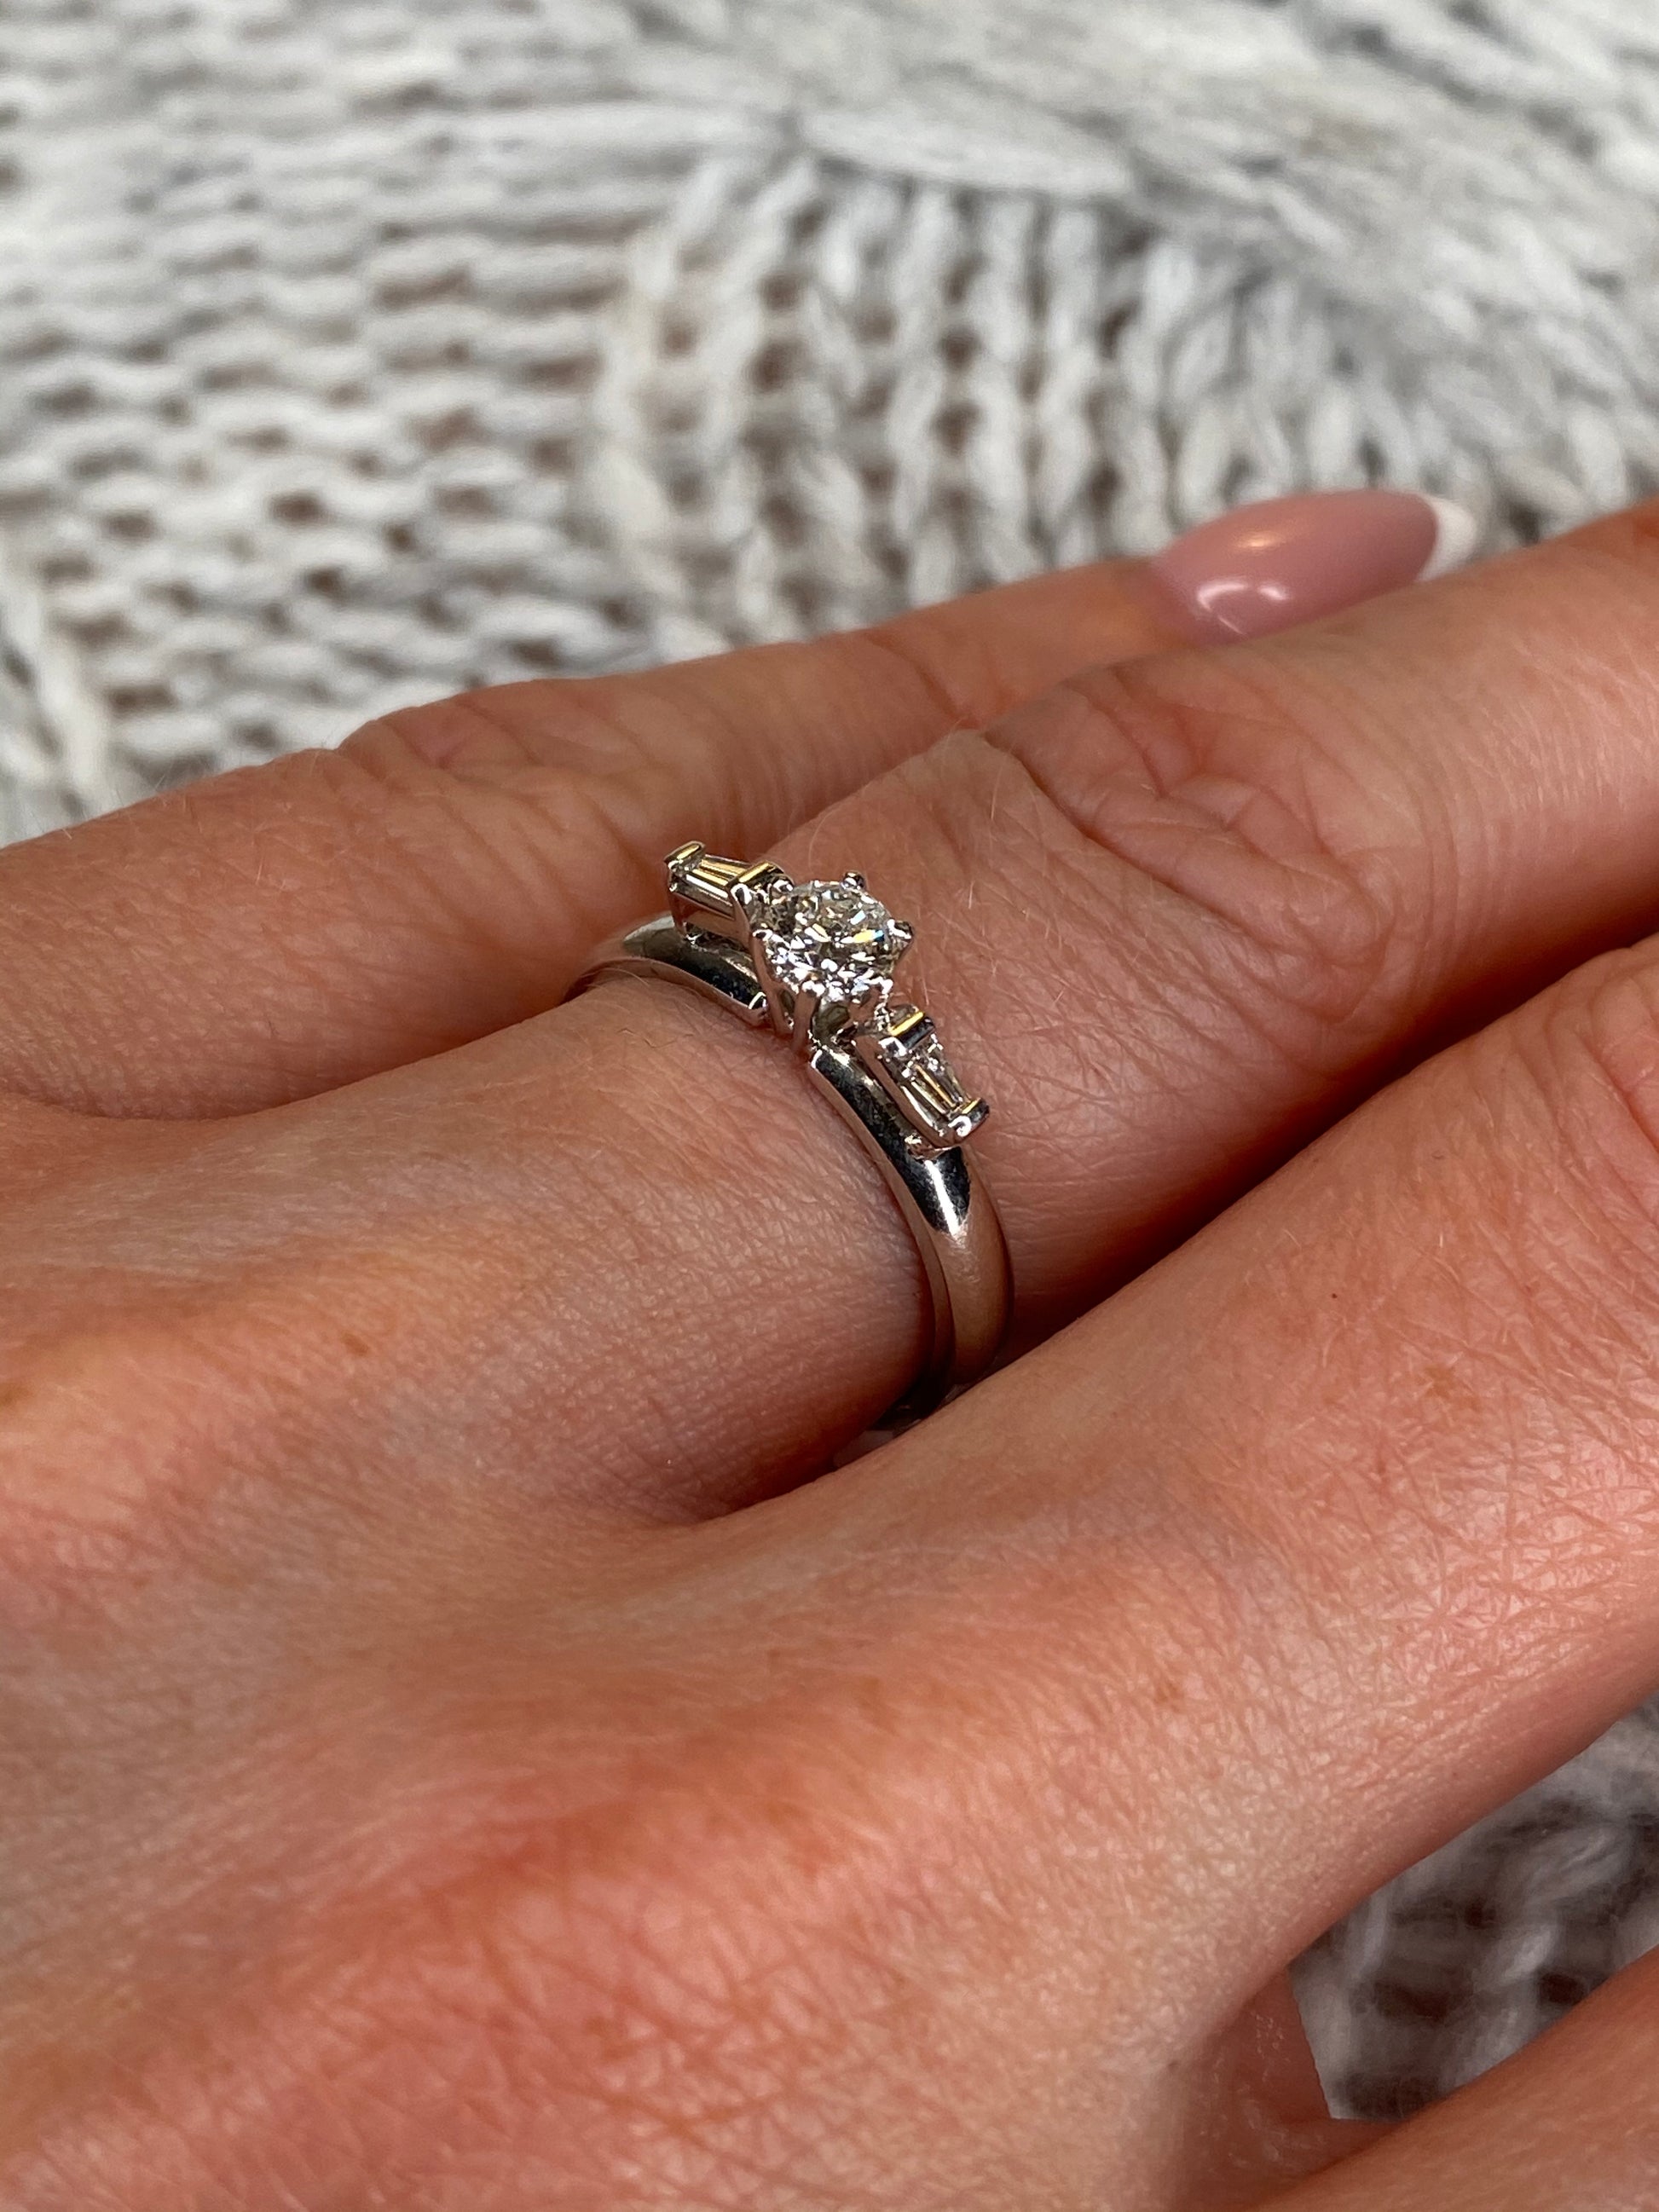 18ct White Gold Diamond Solitaire Engagement Ring with Baguette Shoulders 0.43ct - John Ross Jewellers